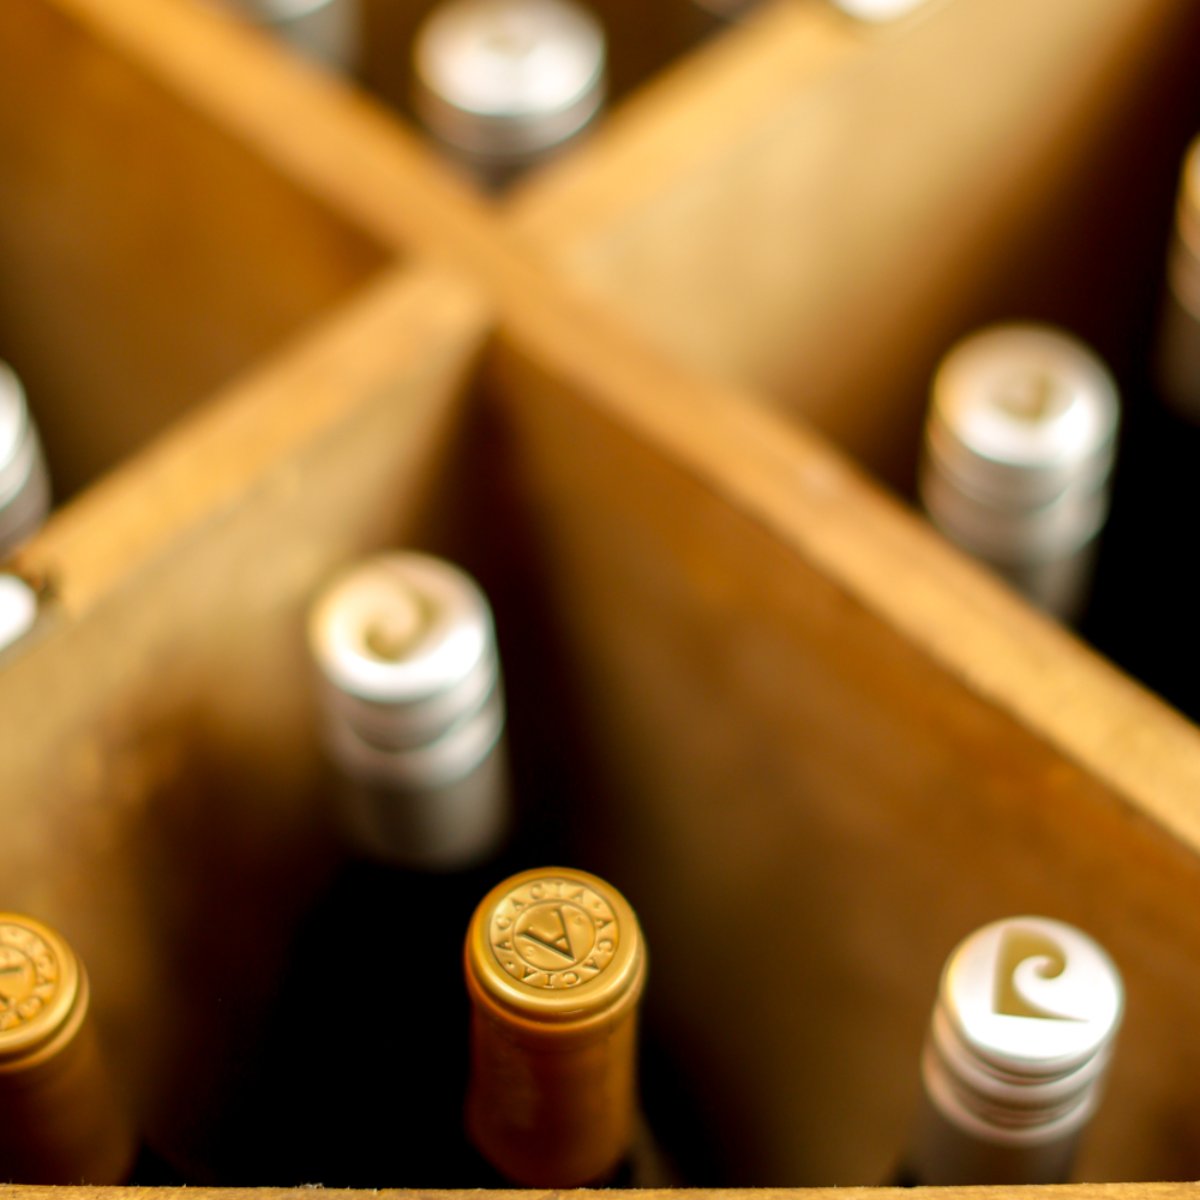 What's your favorite wine currently on your shelf?